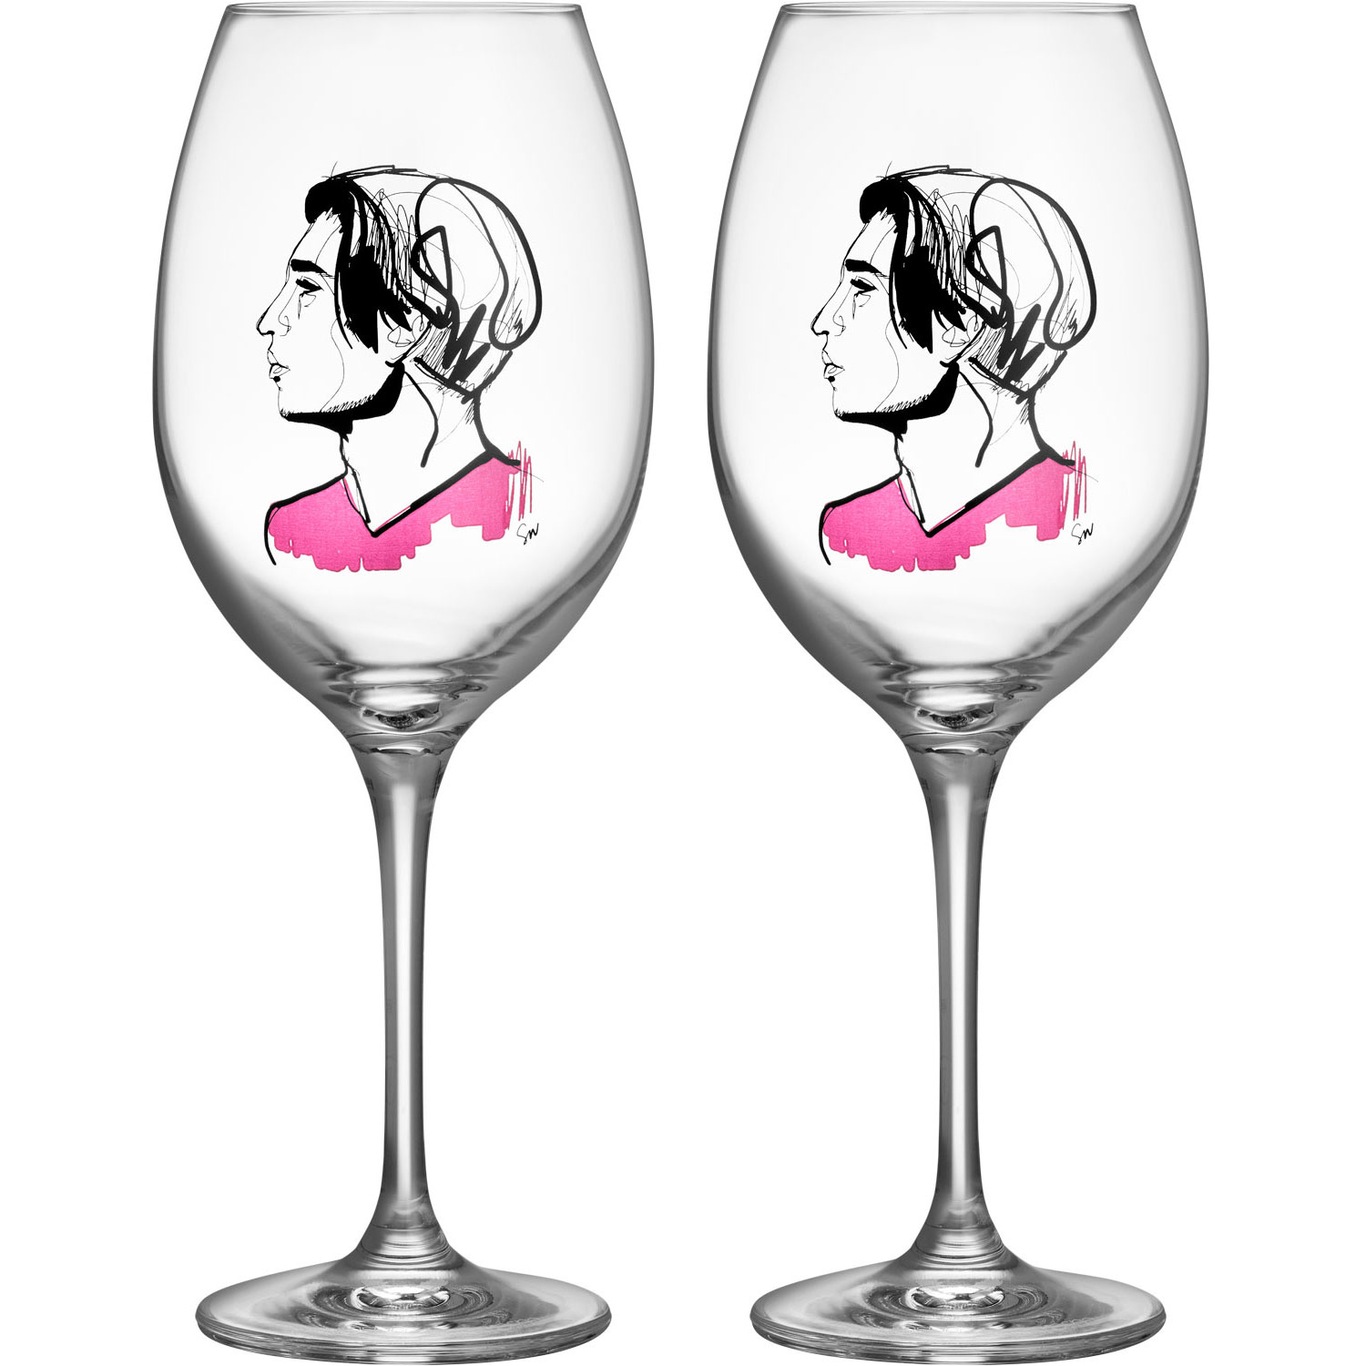 All About You Wine Glass 52 cl 2-pack, Embrace Him